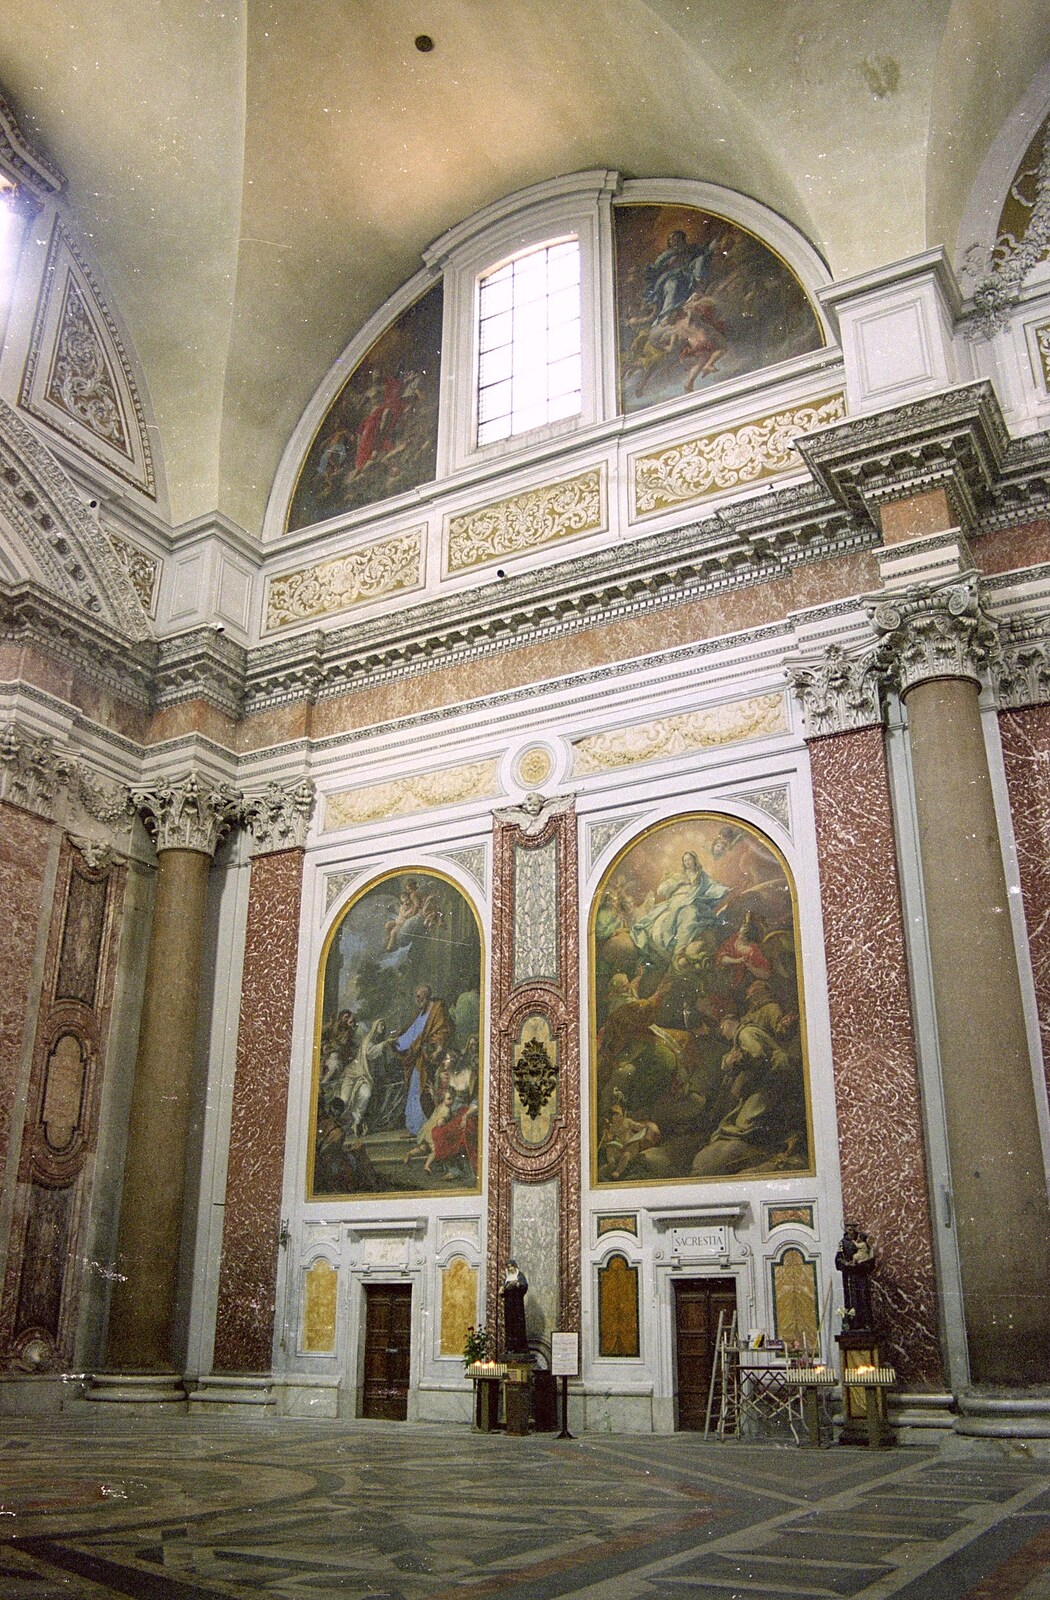 Painted frescos in St. Peter's from A Working Trip to Rome, Italy - 10th September 1999